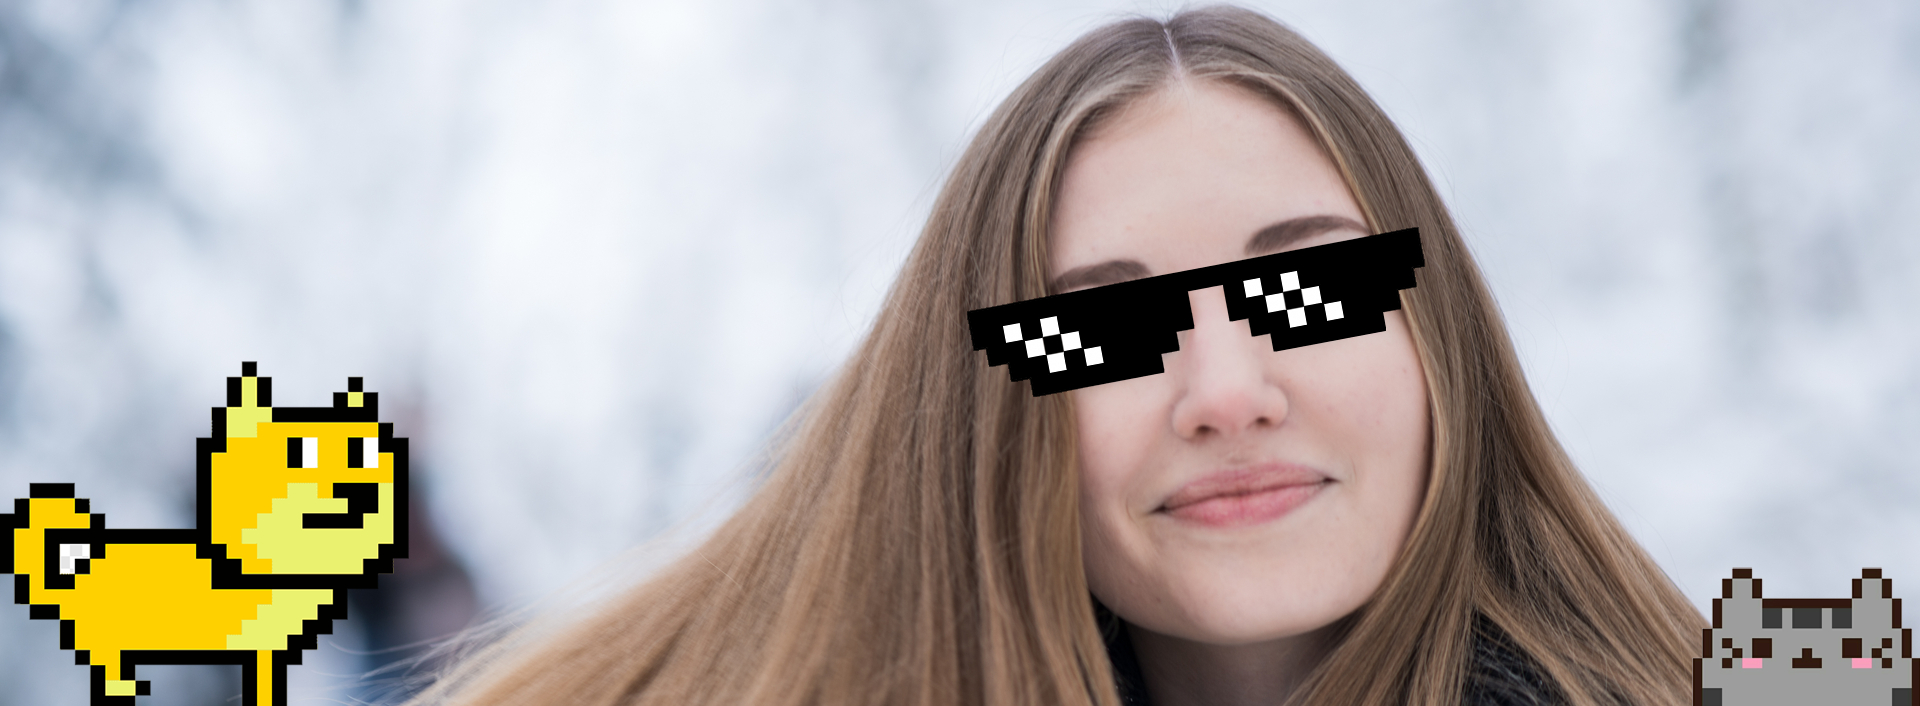 What is a meme? Young Woman and Memes: Pixel Sunglasses, Doge and Kawaii Cat